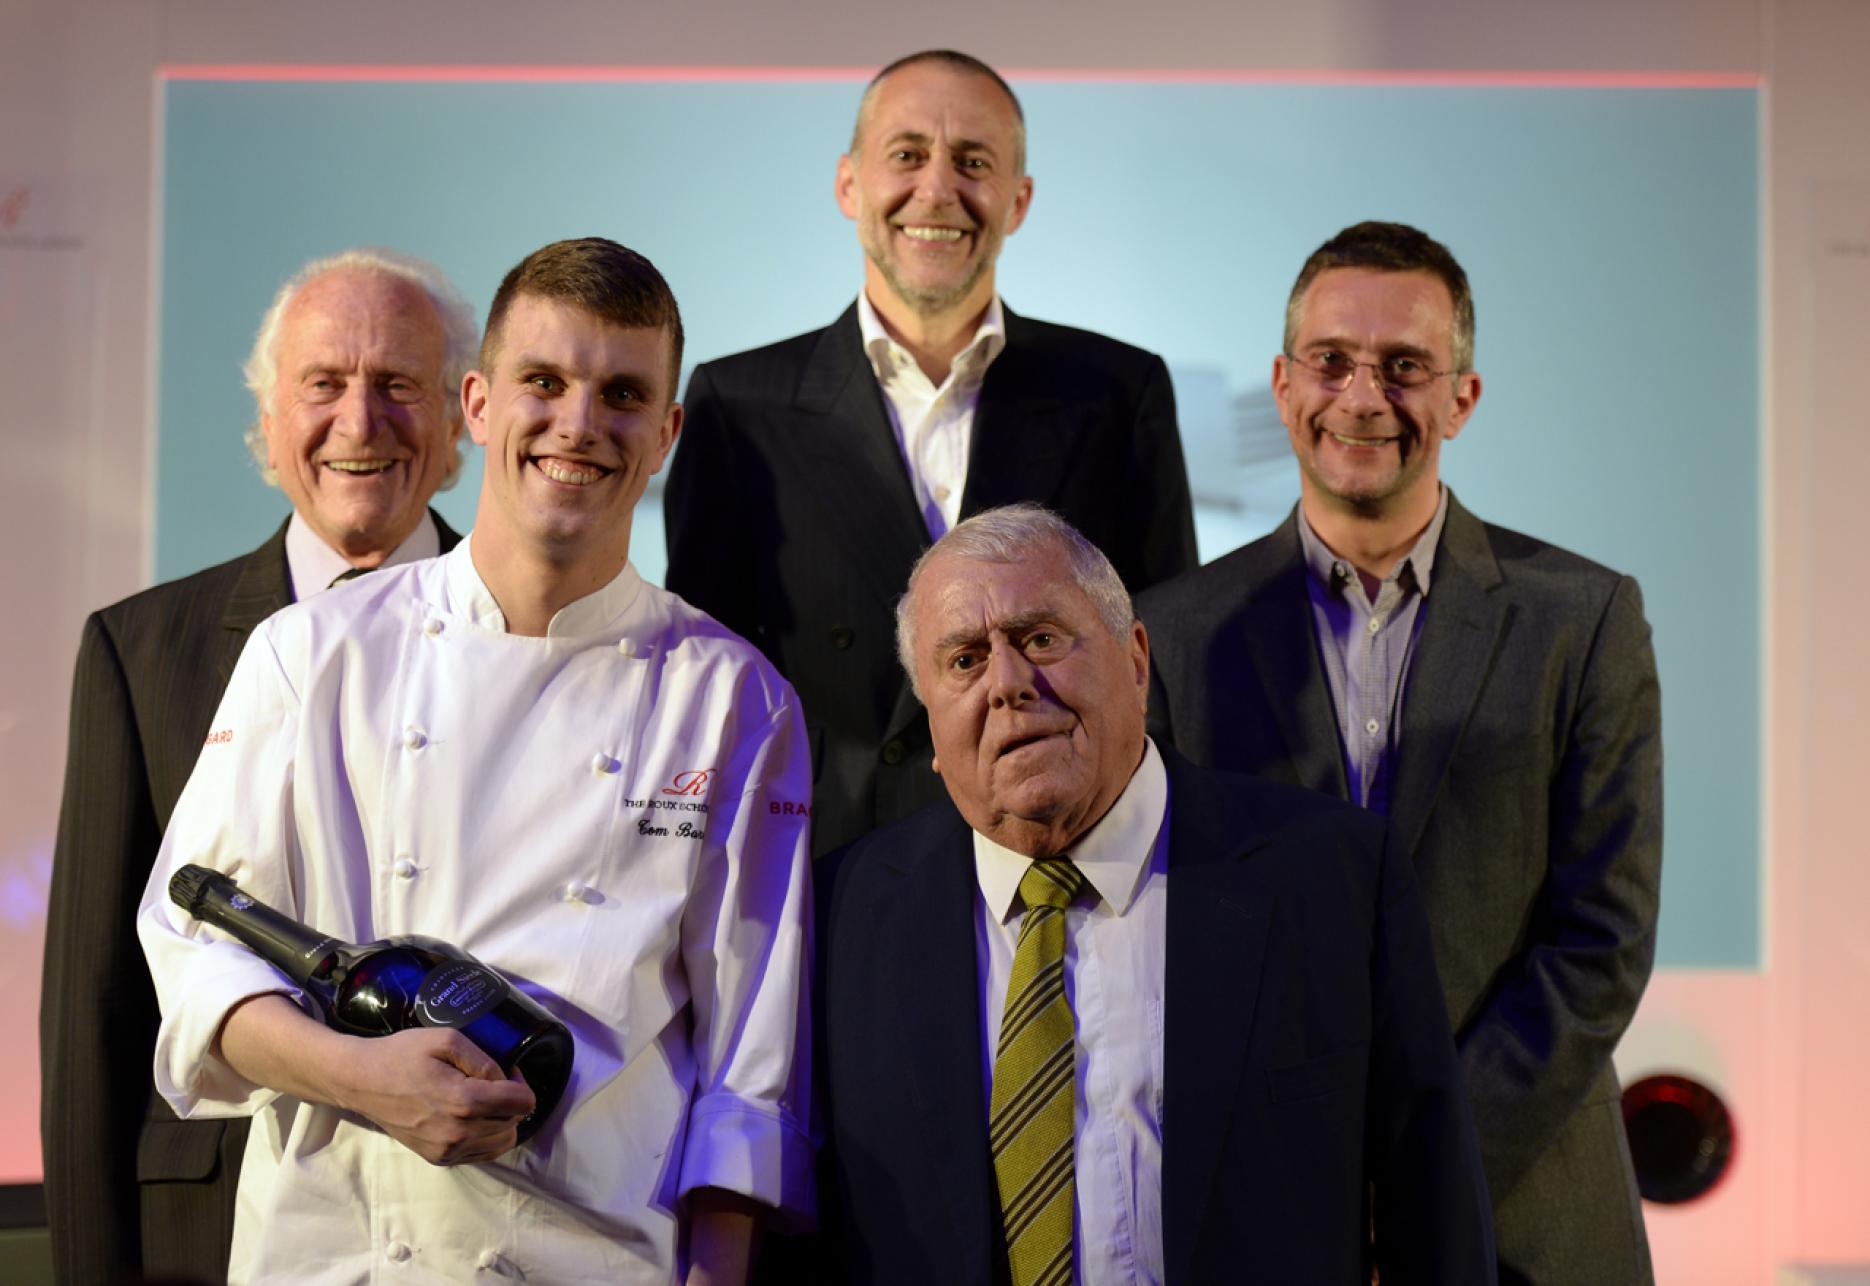 Image of 2014 Roux scholar Tom Barnes and the Roux family